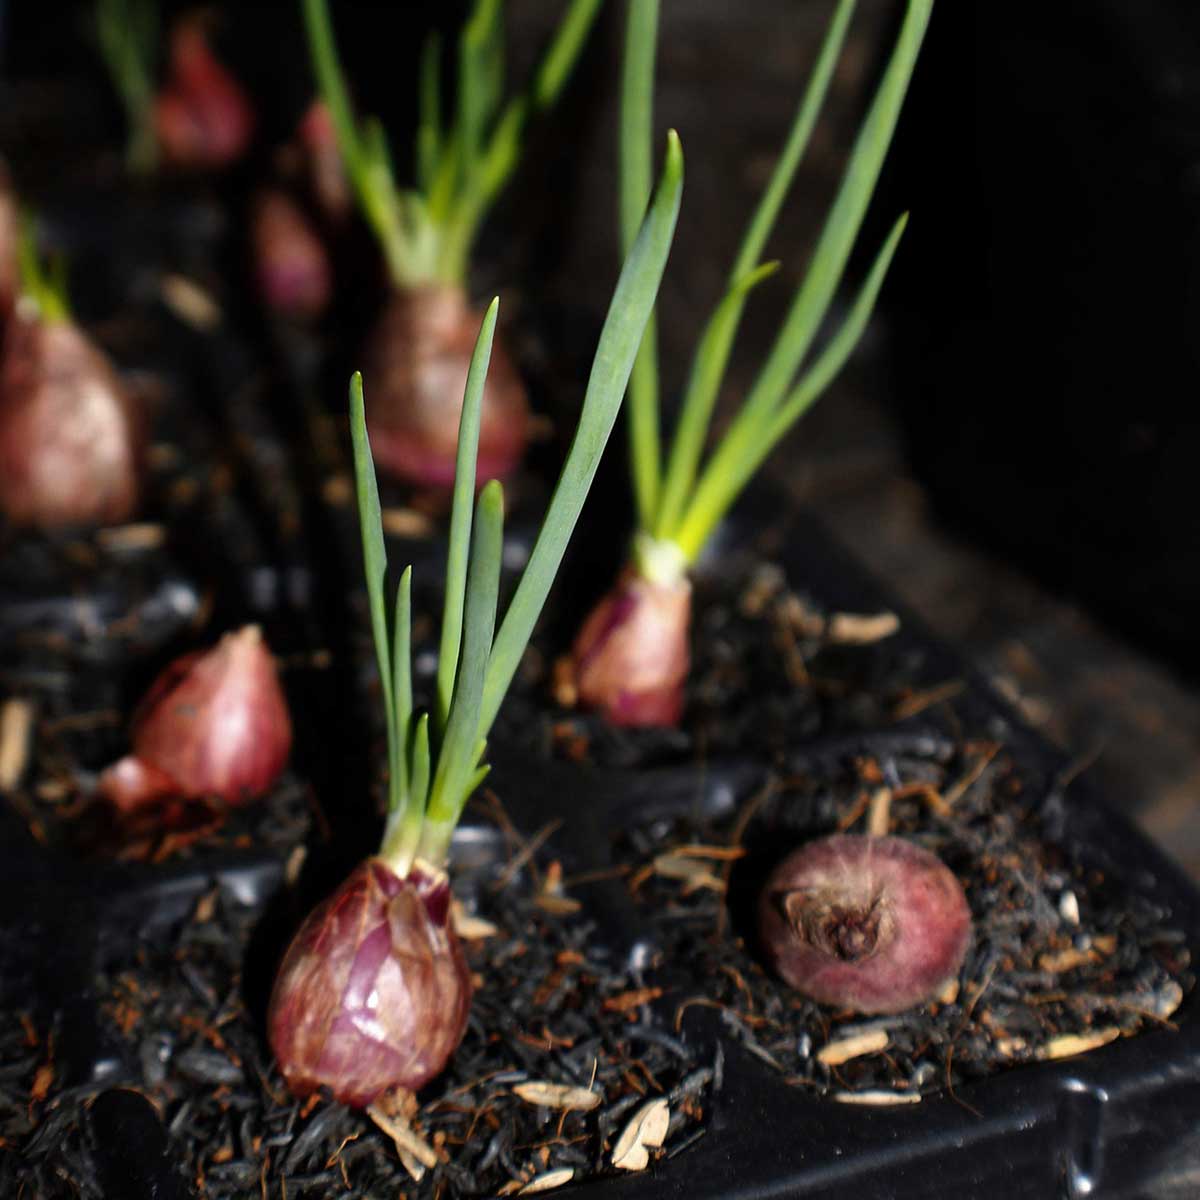 Red onions with leaves